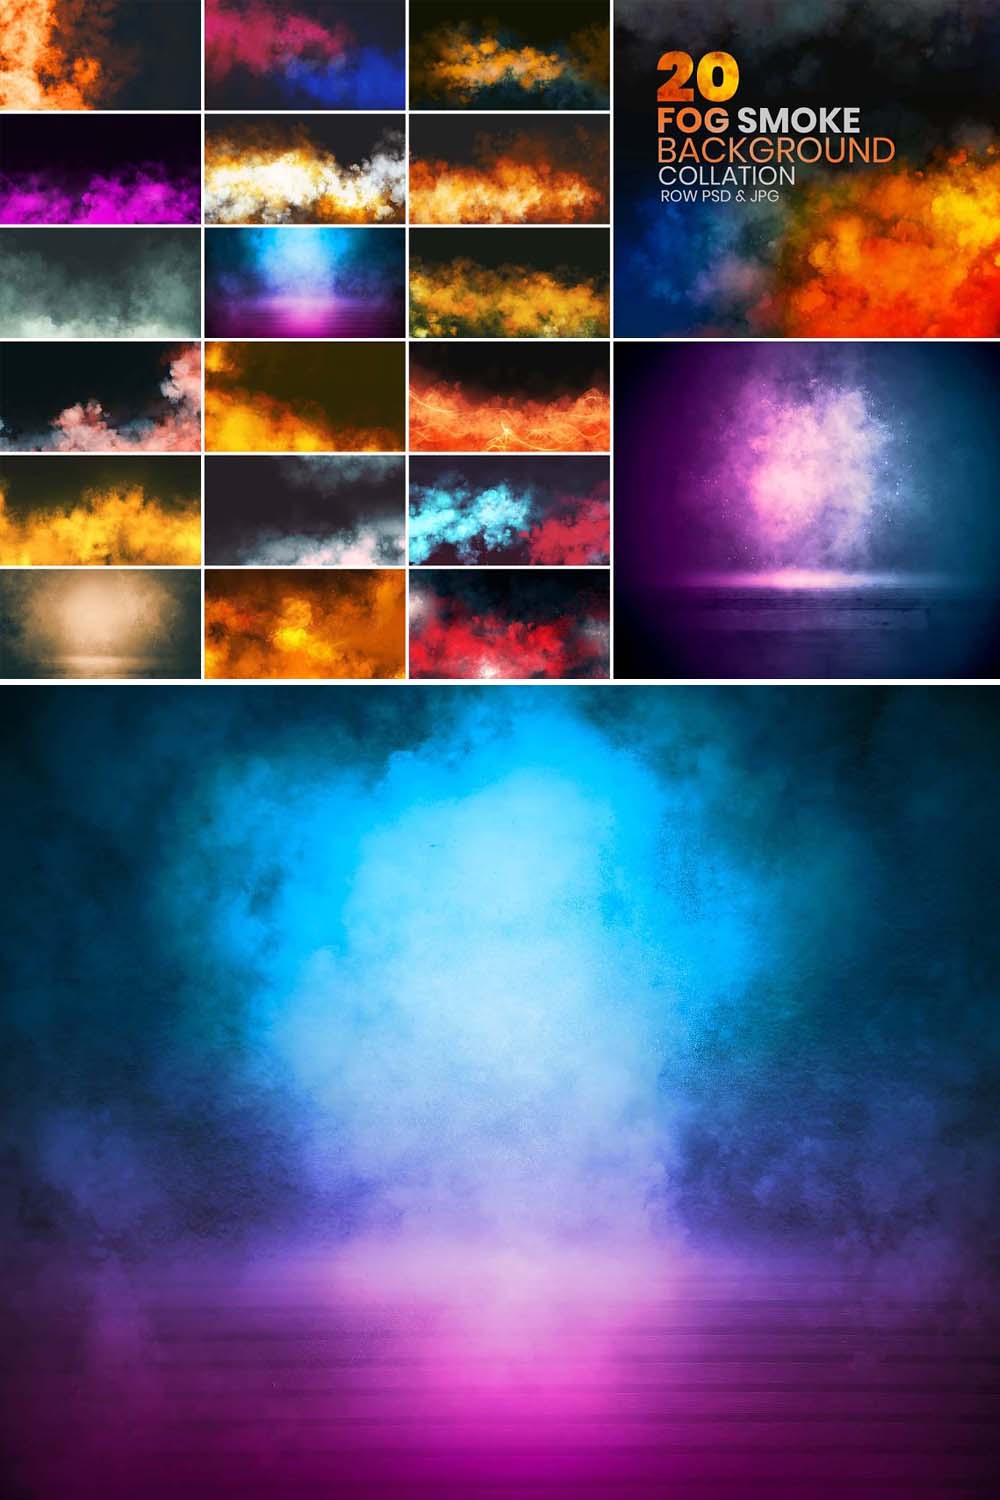 Fog Smoke Background Collation pinterest preview image.